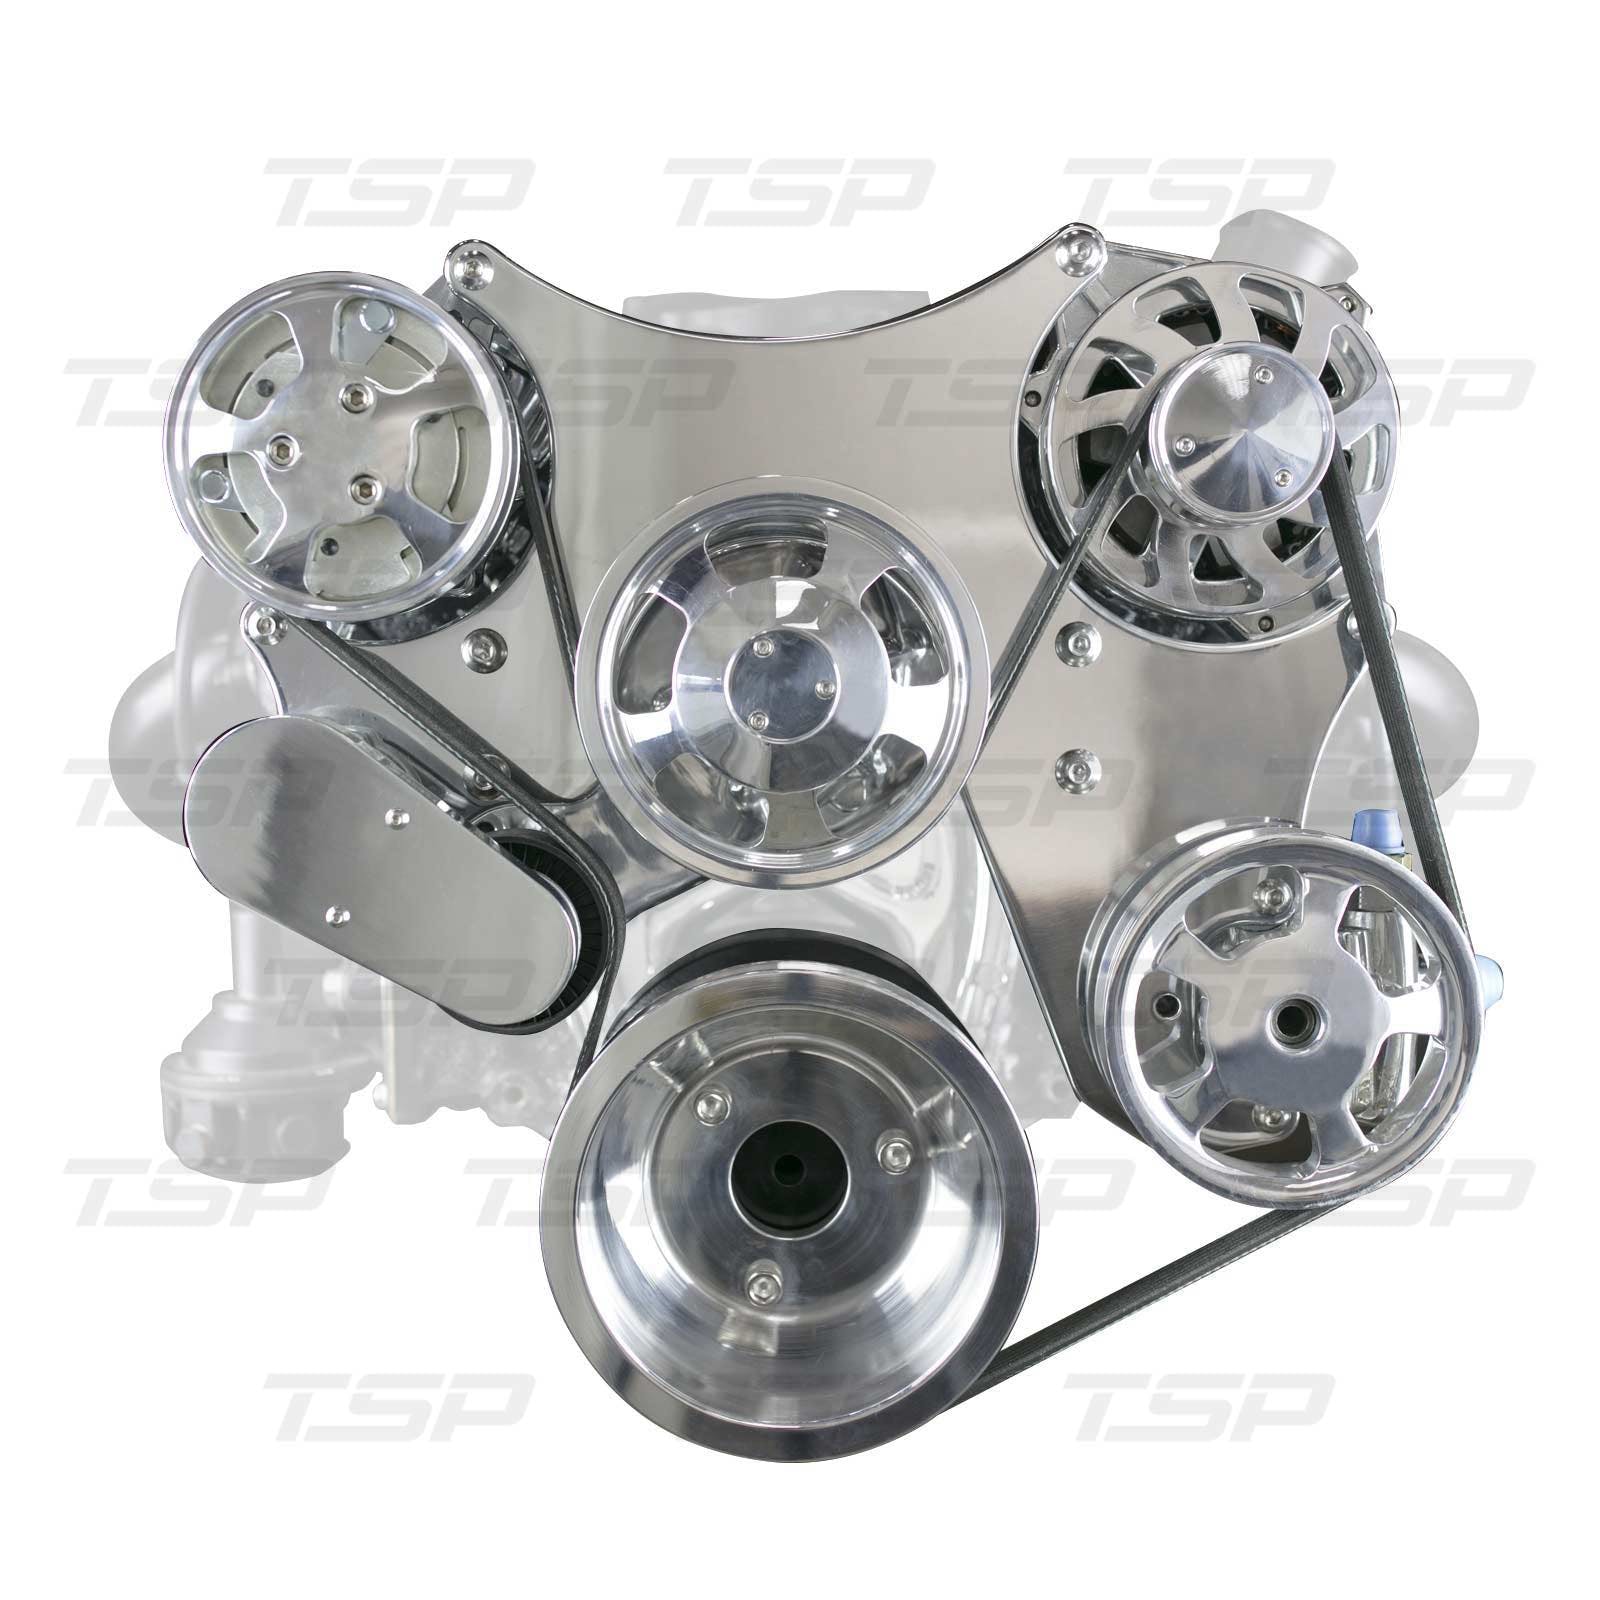 Top Street Performance DS35014P Sbc Serpentine Front Drive System Polished